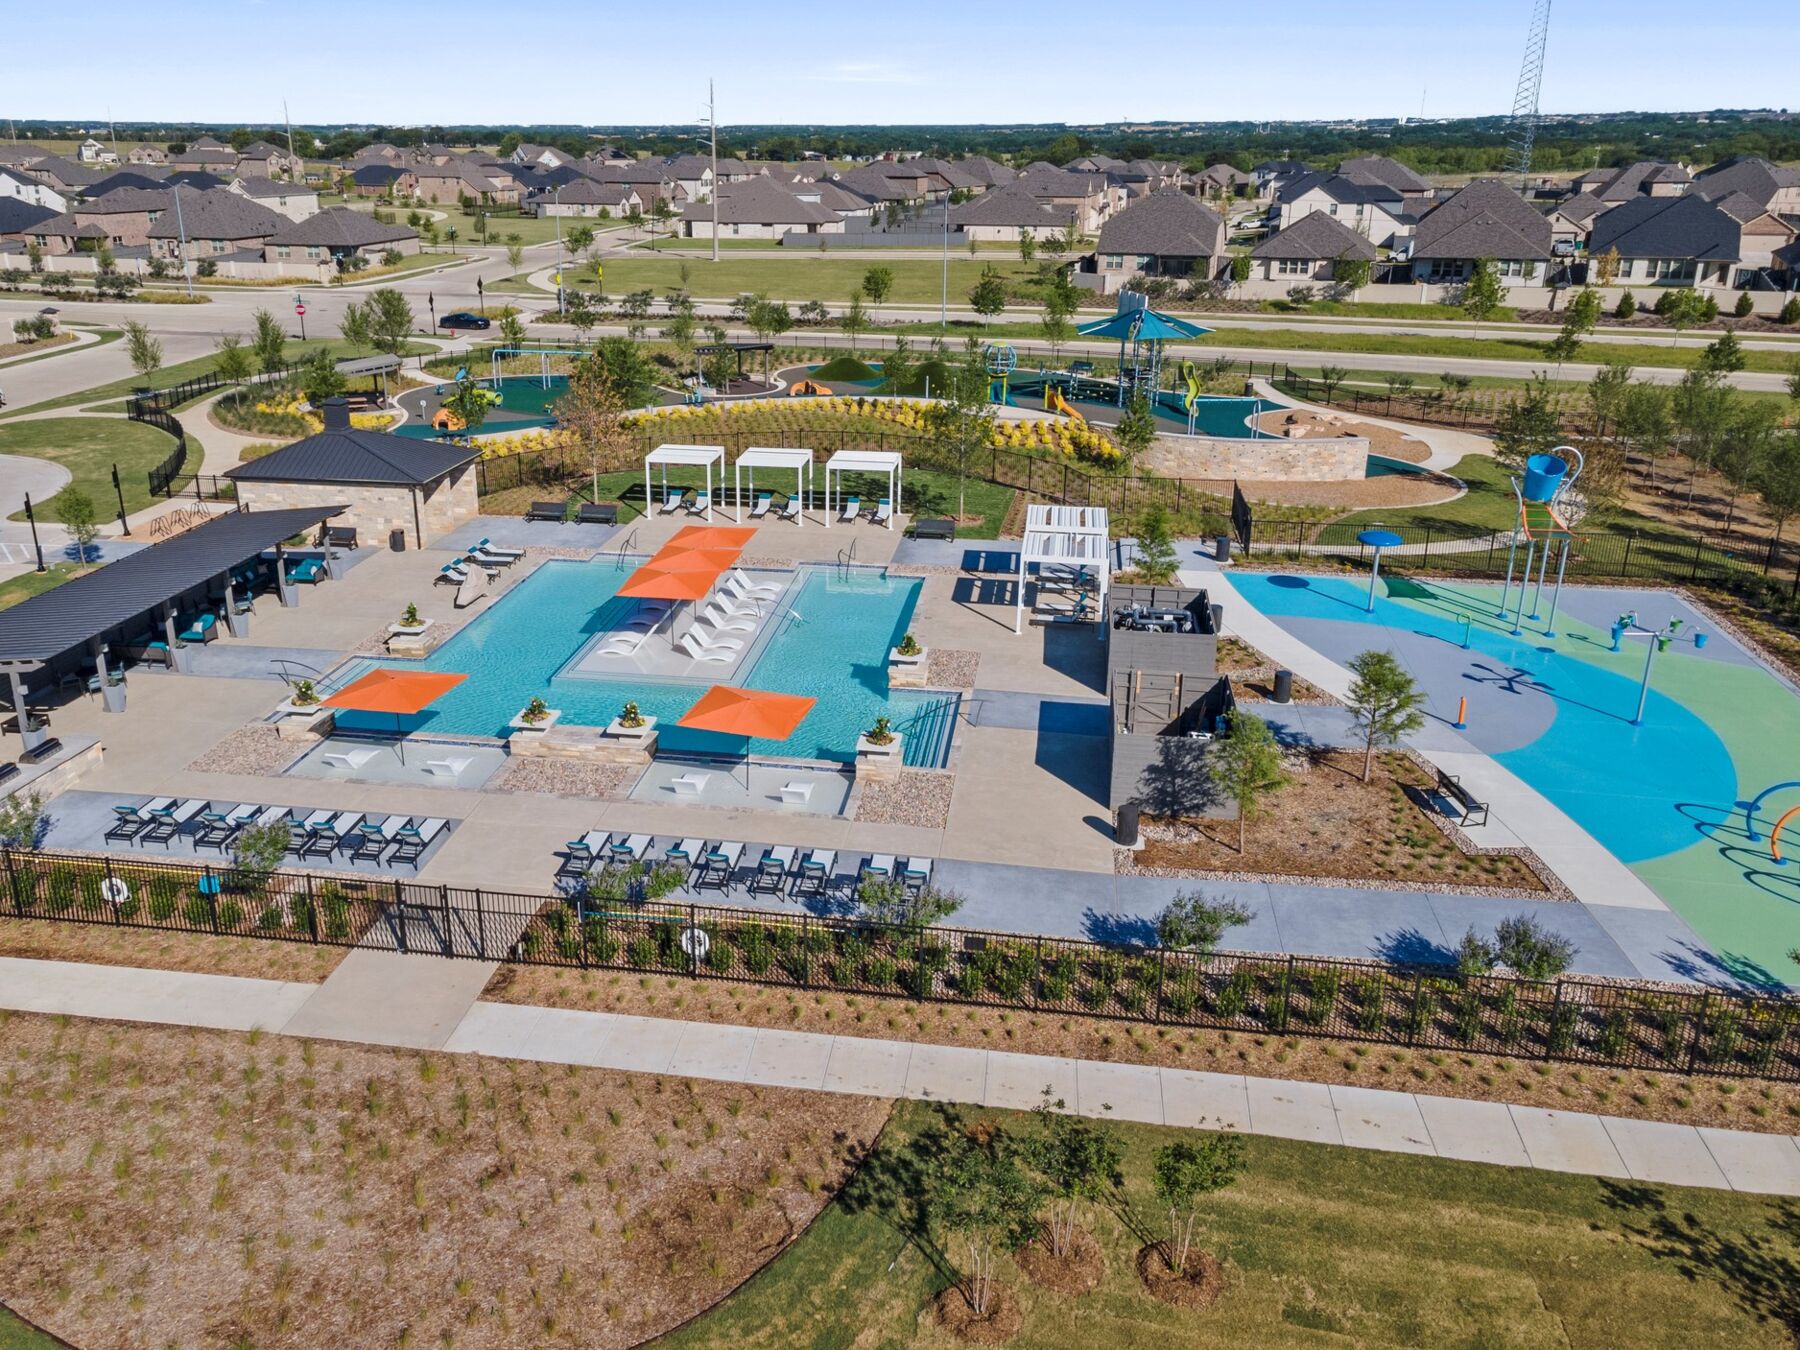 Aerial view of a suburban recreational area near new homes in Mansfield TX, featuring a swimming pool, lounge chairs, and a splash pad.